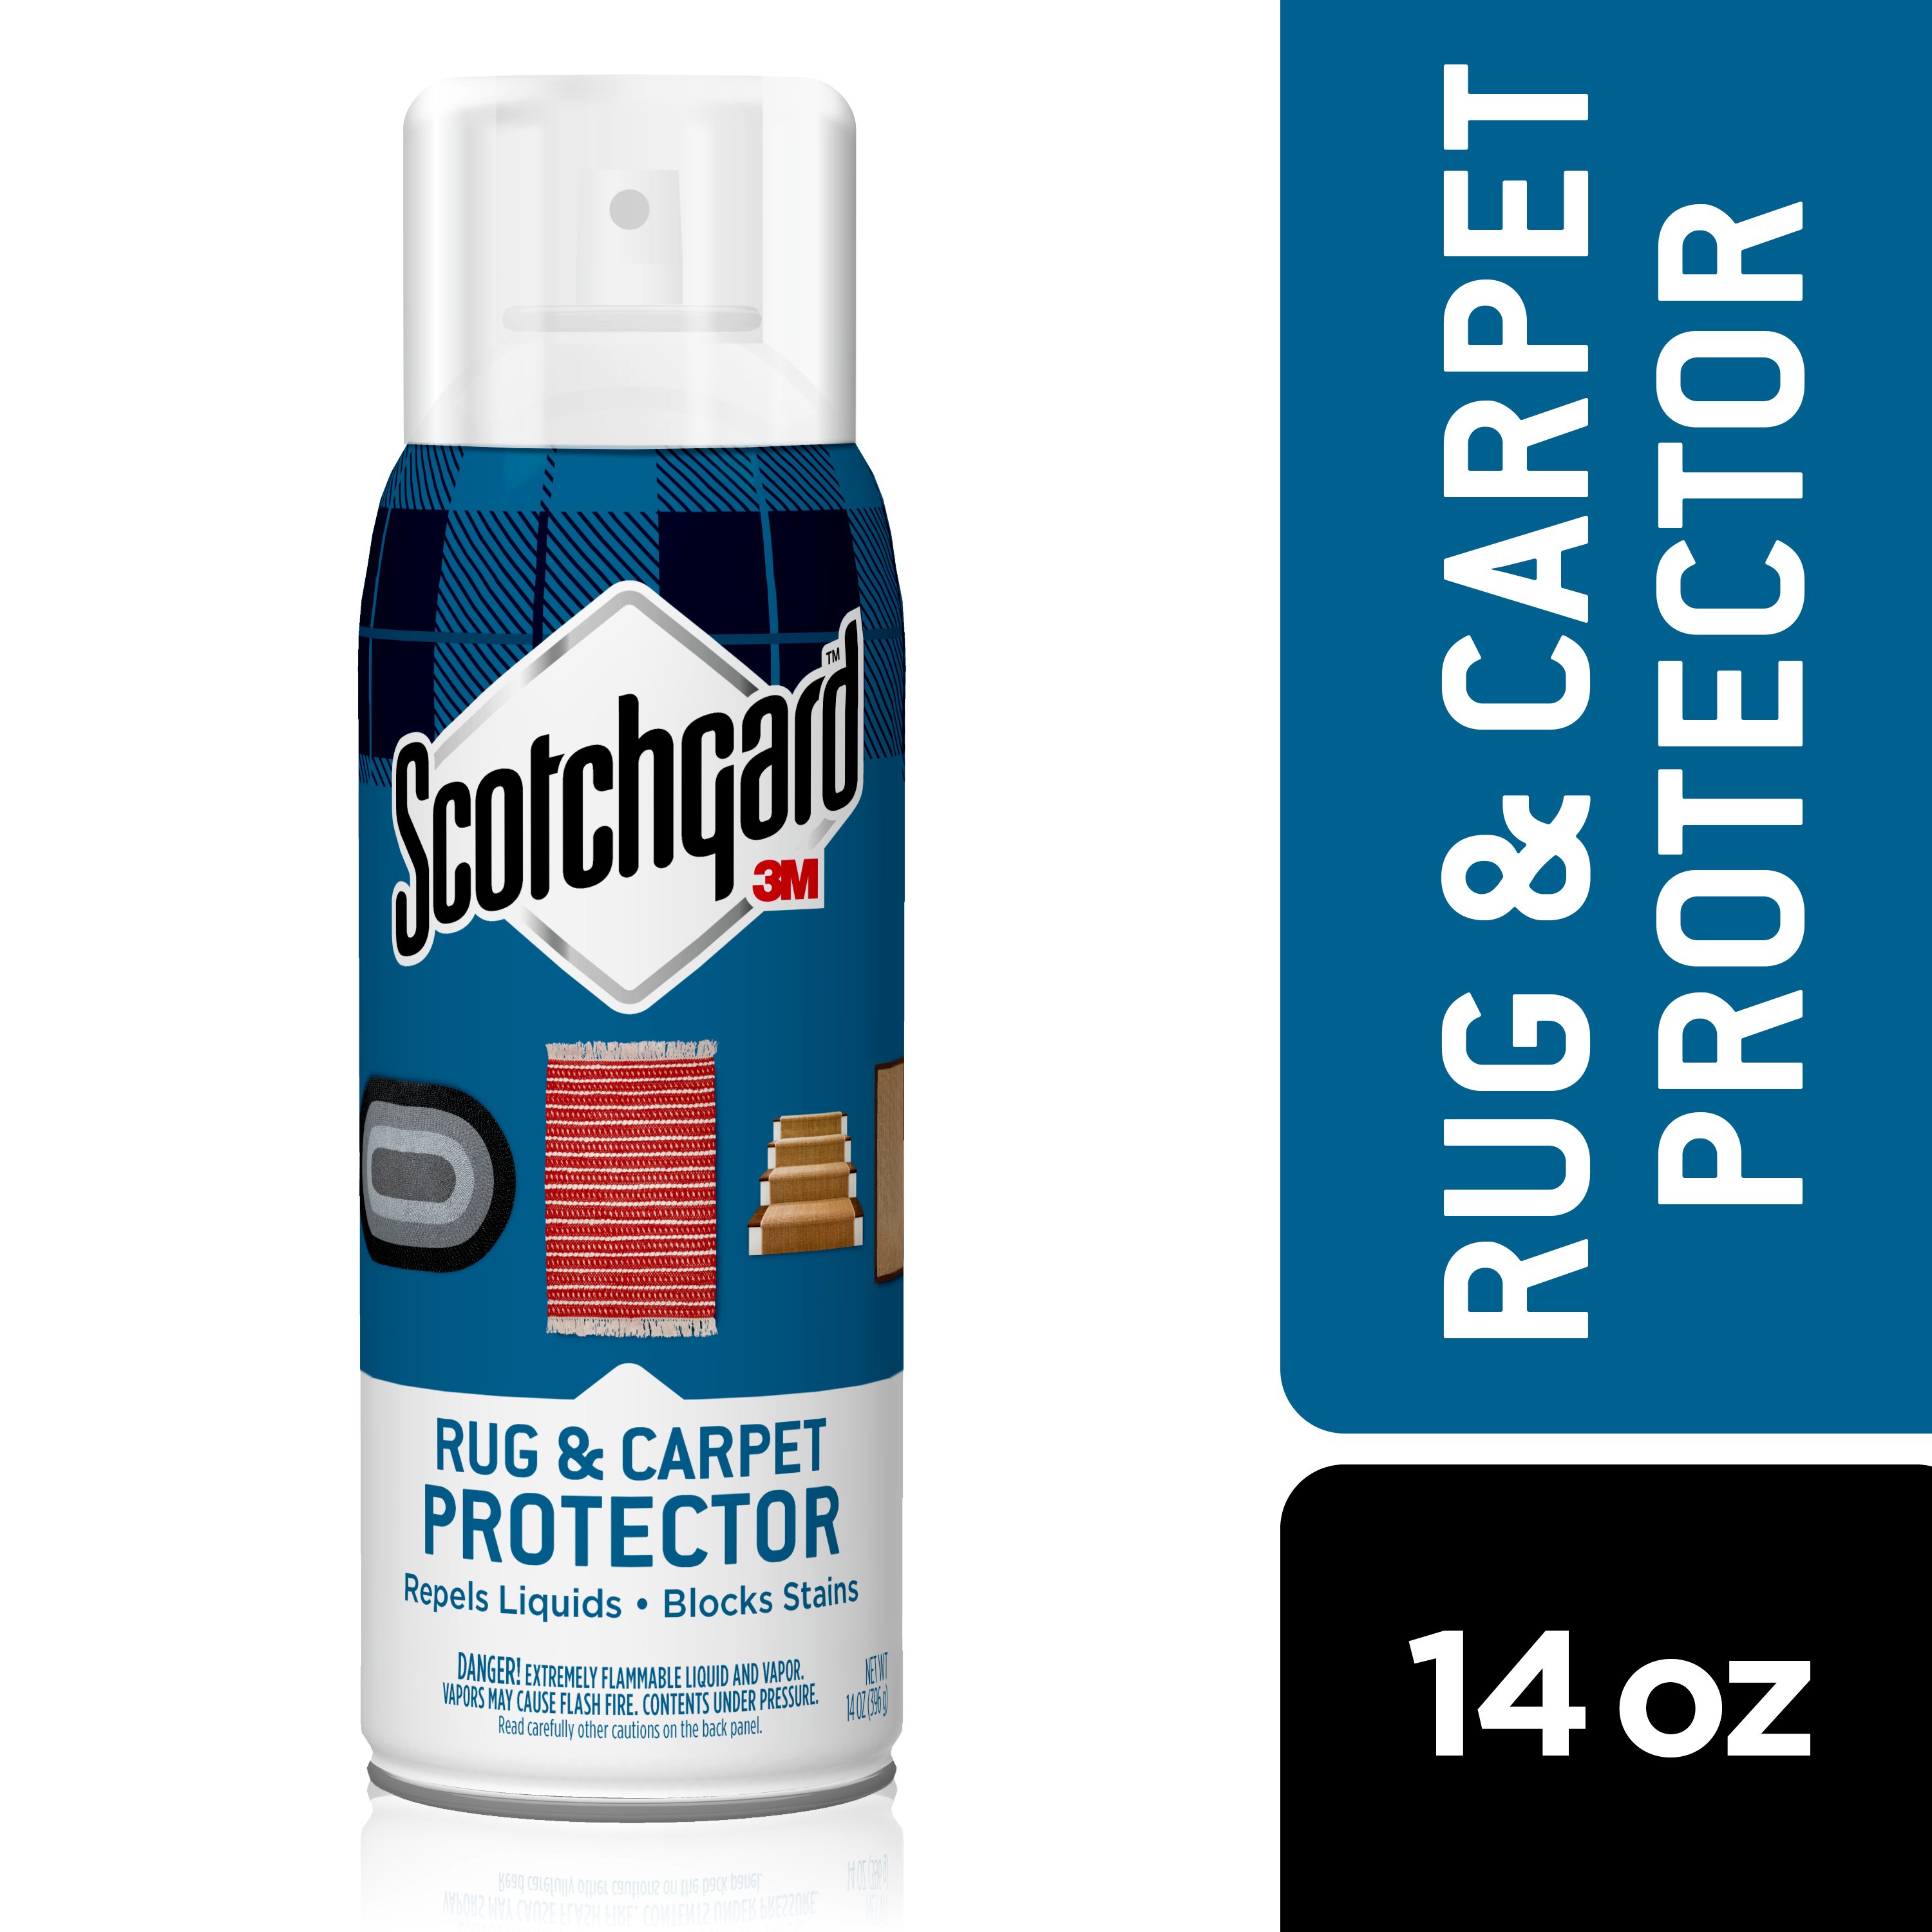 Scotchgard Rug & Carpet Protector and Stain Blocker Spray, 14 oz, 1 Can - image 1 of 4